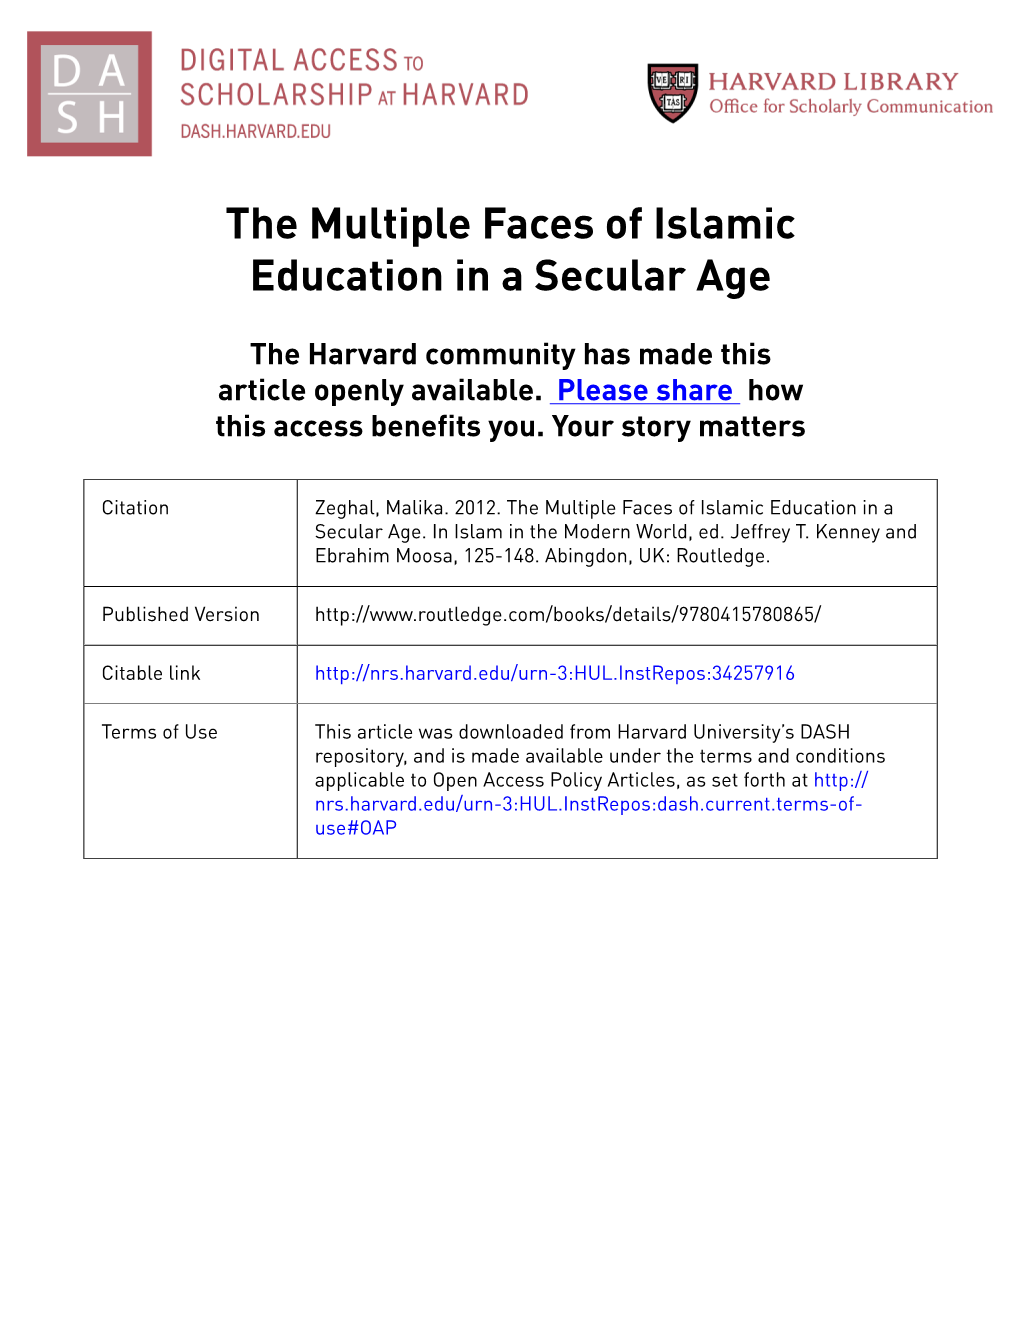 The Multiple Faces of Islamic Education in a Secular Age